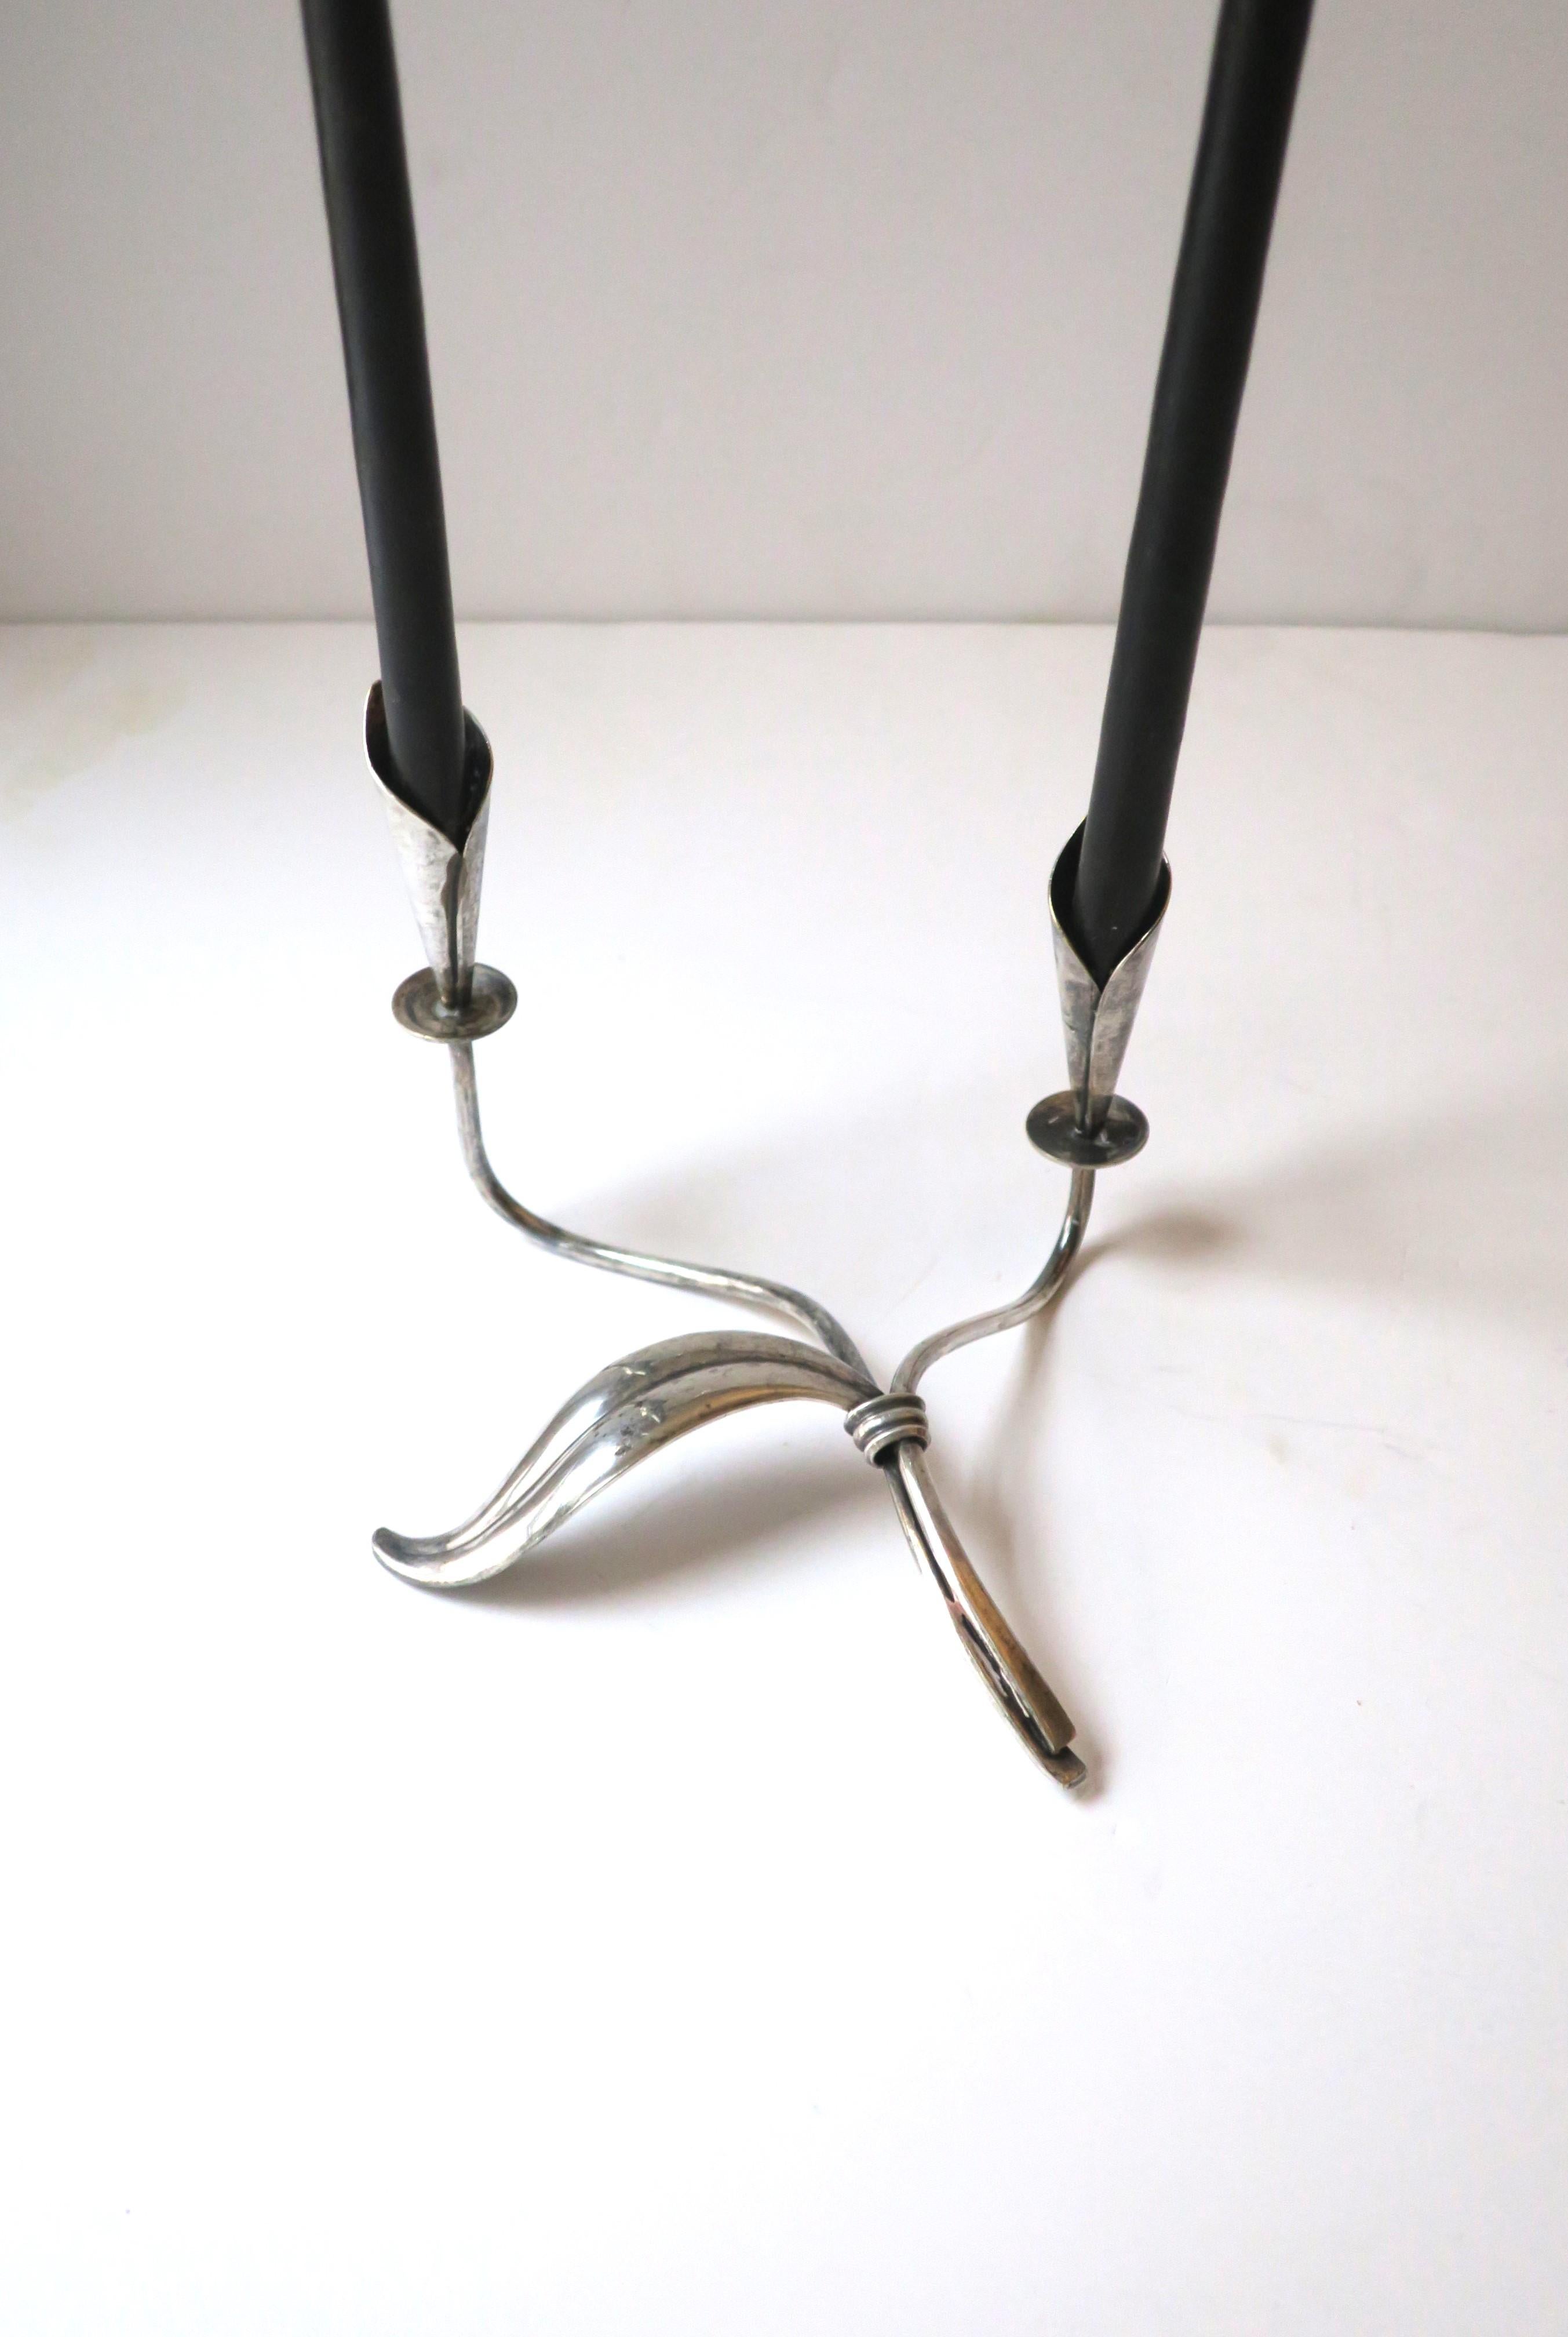 A beautiful Danish / Scandinavian Modern / Organic Modern sterling silver plate candlestick or candelabra holder attributed to designer Hans Jensen, circa mid-20th century, Denmark. Holder has two stems with modern Calla Lilly flower sconces, small